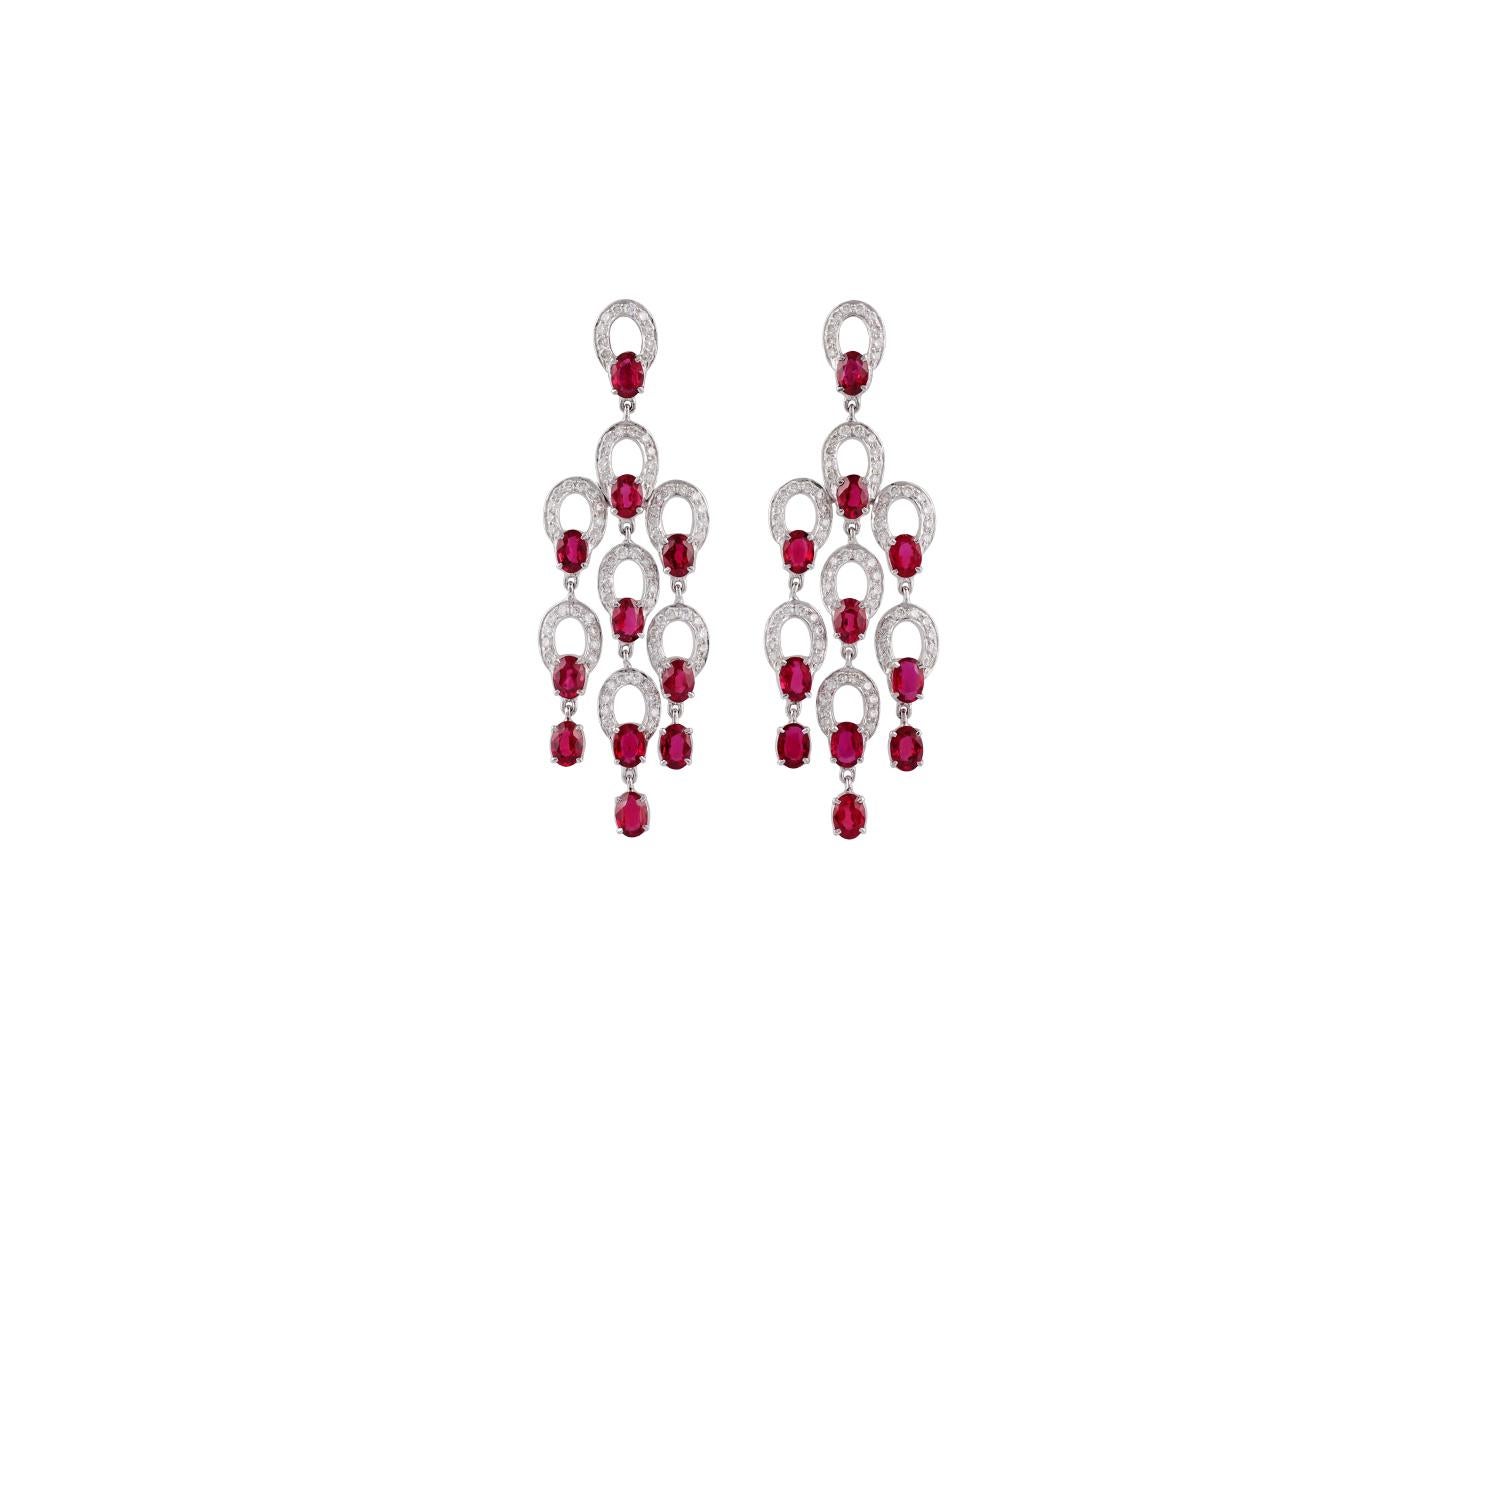 These are an elegant chandelier earrings features 22 pieces of oval shaped rubies weight 7.80 carat with round shaped diamonds weight 1.84 carat, these earrings are entirely made in 18K white gold weight 11.95 grams, earrings have a simple pull-push